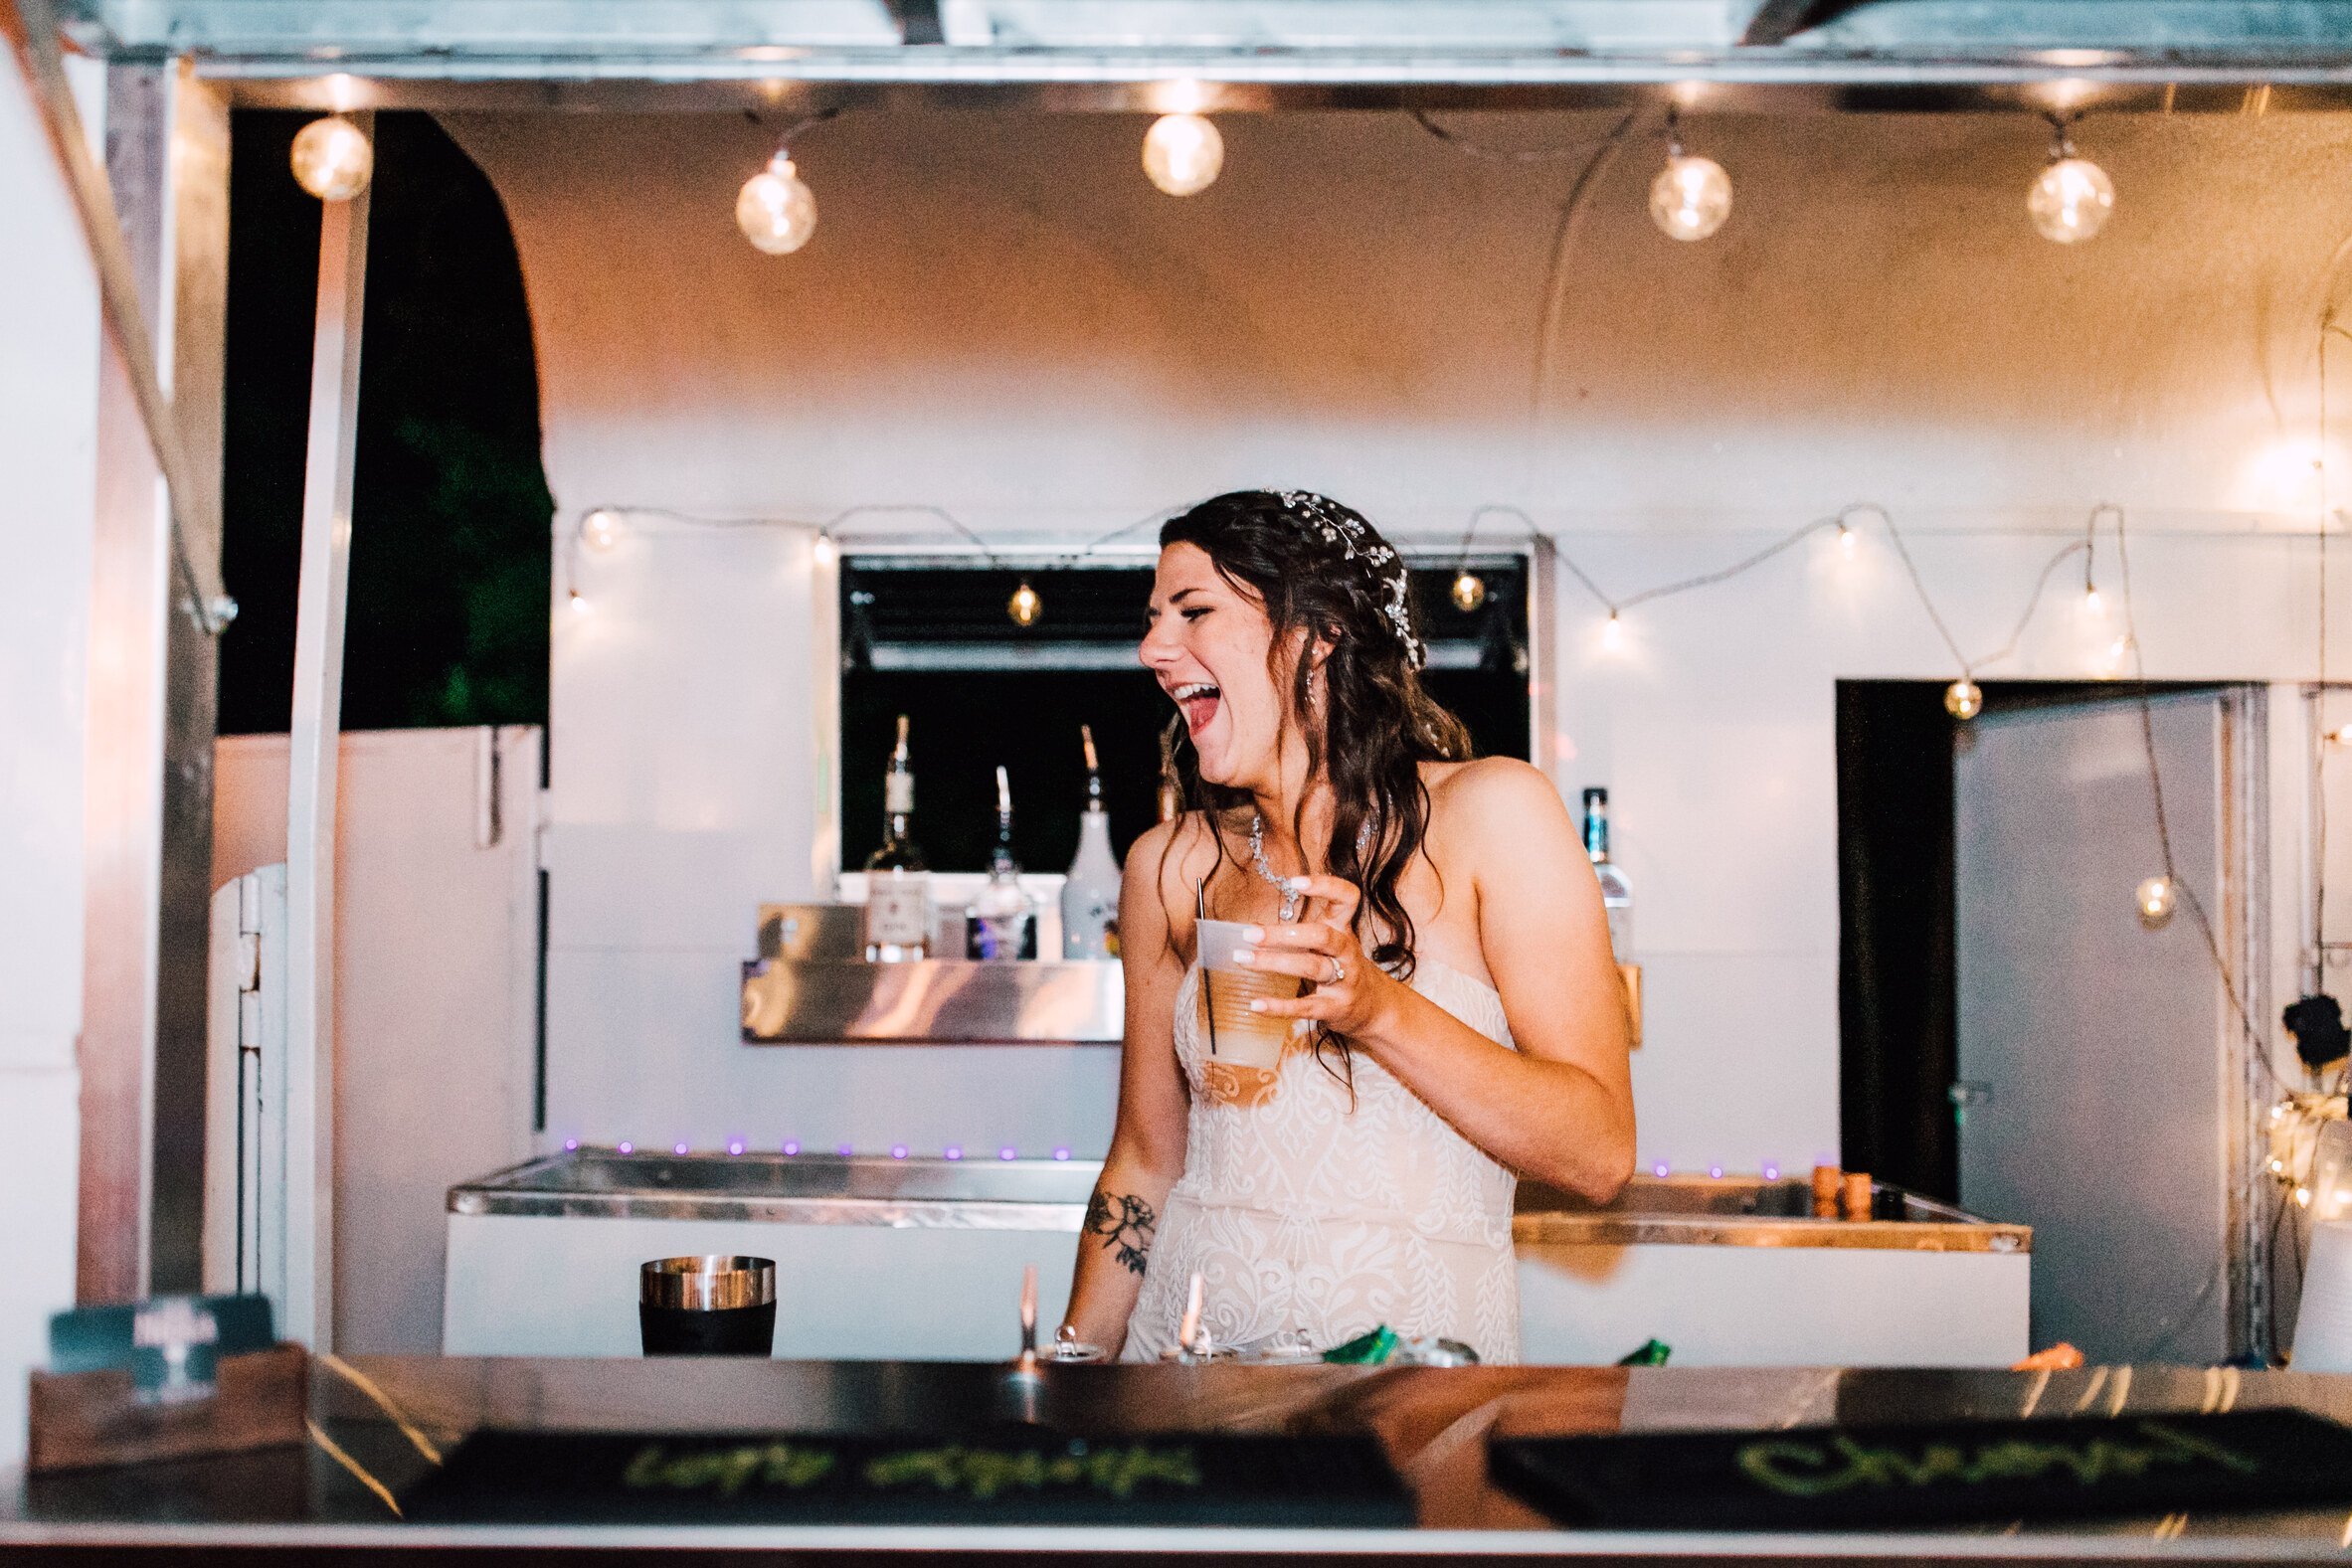  The bride laughs in the mobile bar at her rustic wedding reception 